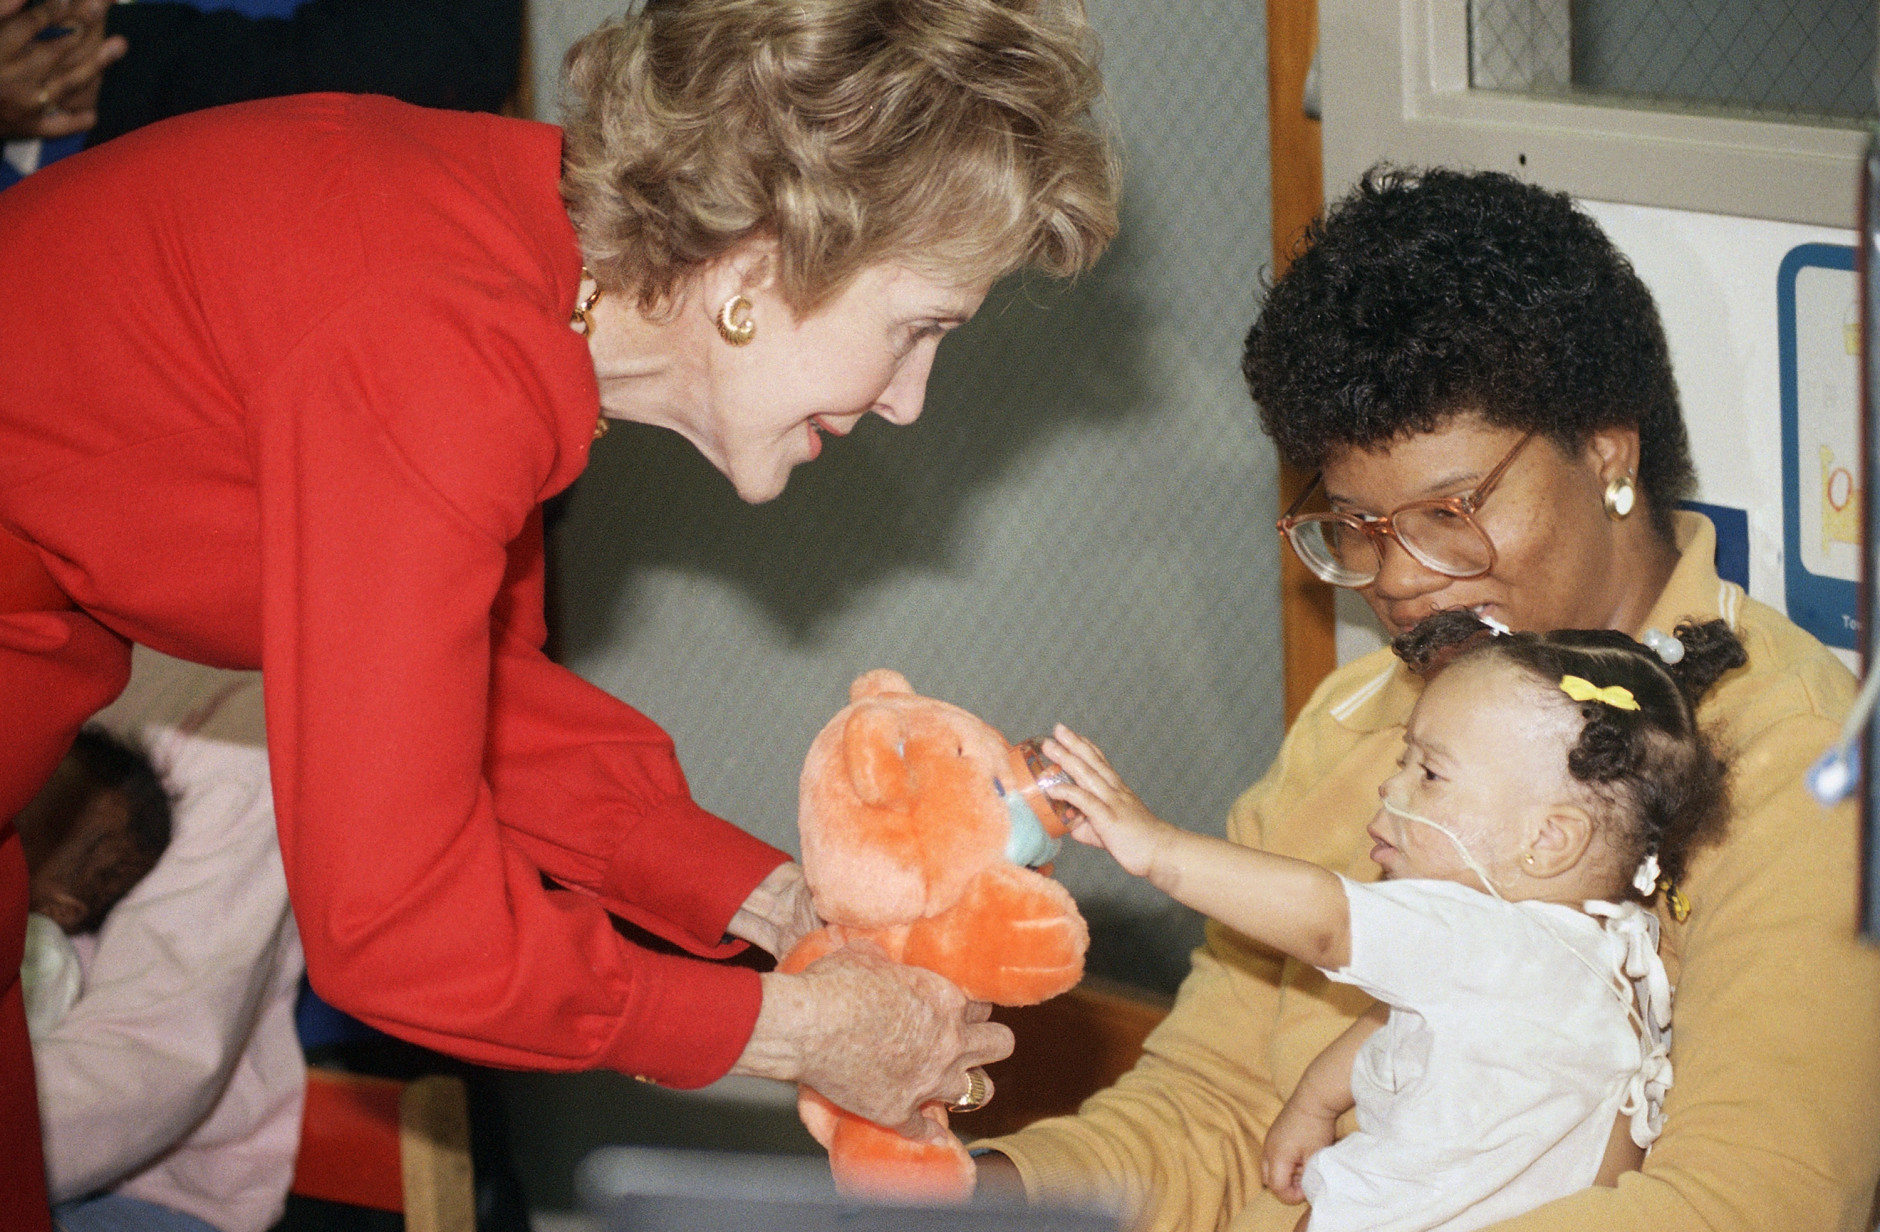 Eleven month old Nicole Seay reaches out to touch the nose of a teddy bear held by first lady Nancy Reagan on Wednesday, Dec. 14, 1988 at the Children's Hospital in Washington.   Nicole is held by her mother Corinthia.    Mrs. Reagan makes an annual holiday visit to the hospital to greet the children. (AP Photo/Rick Bowmer)